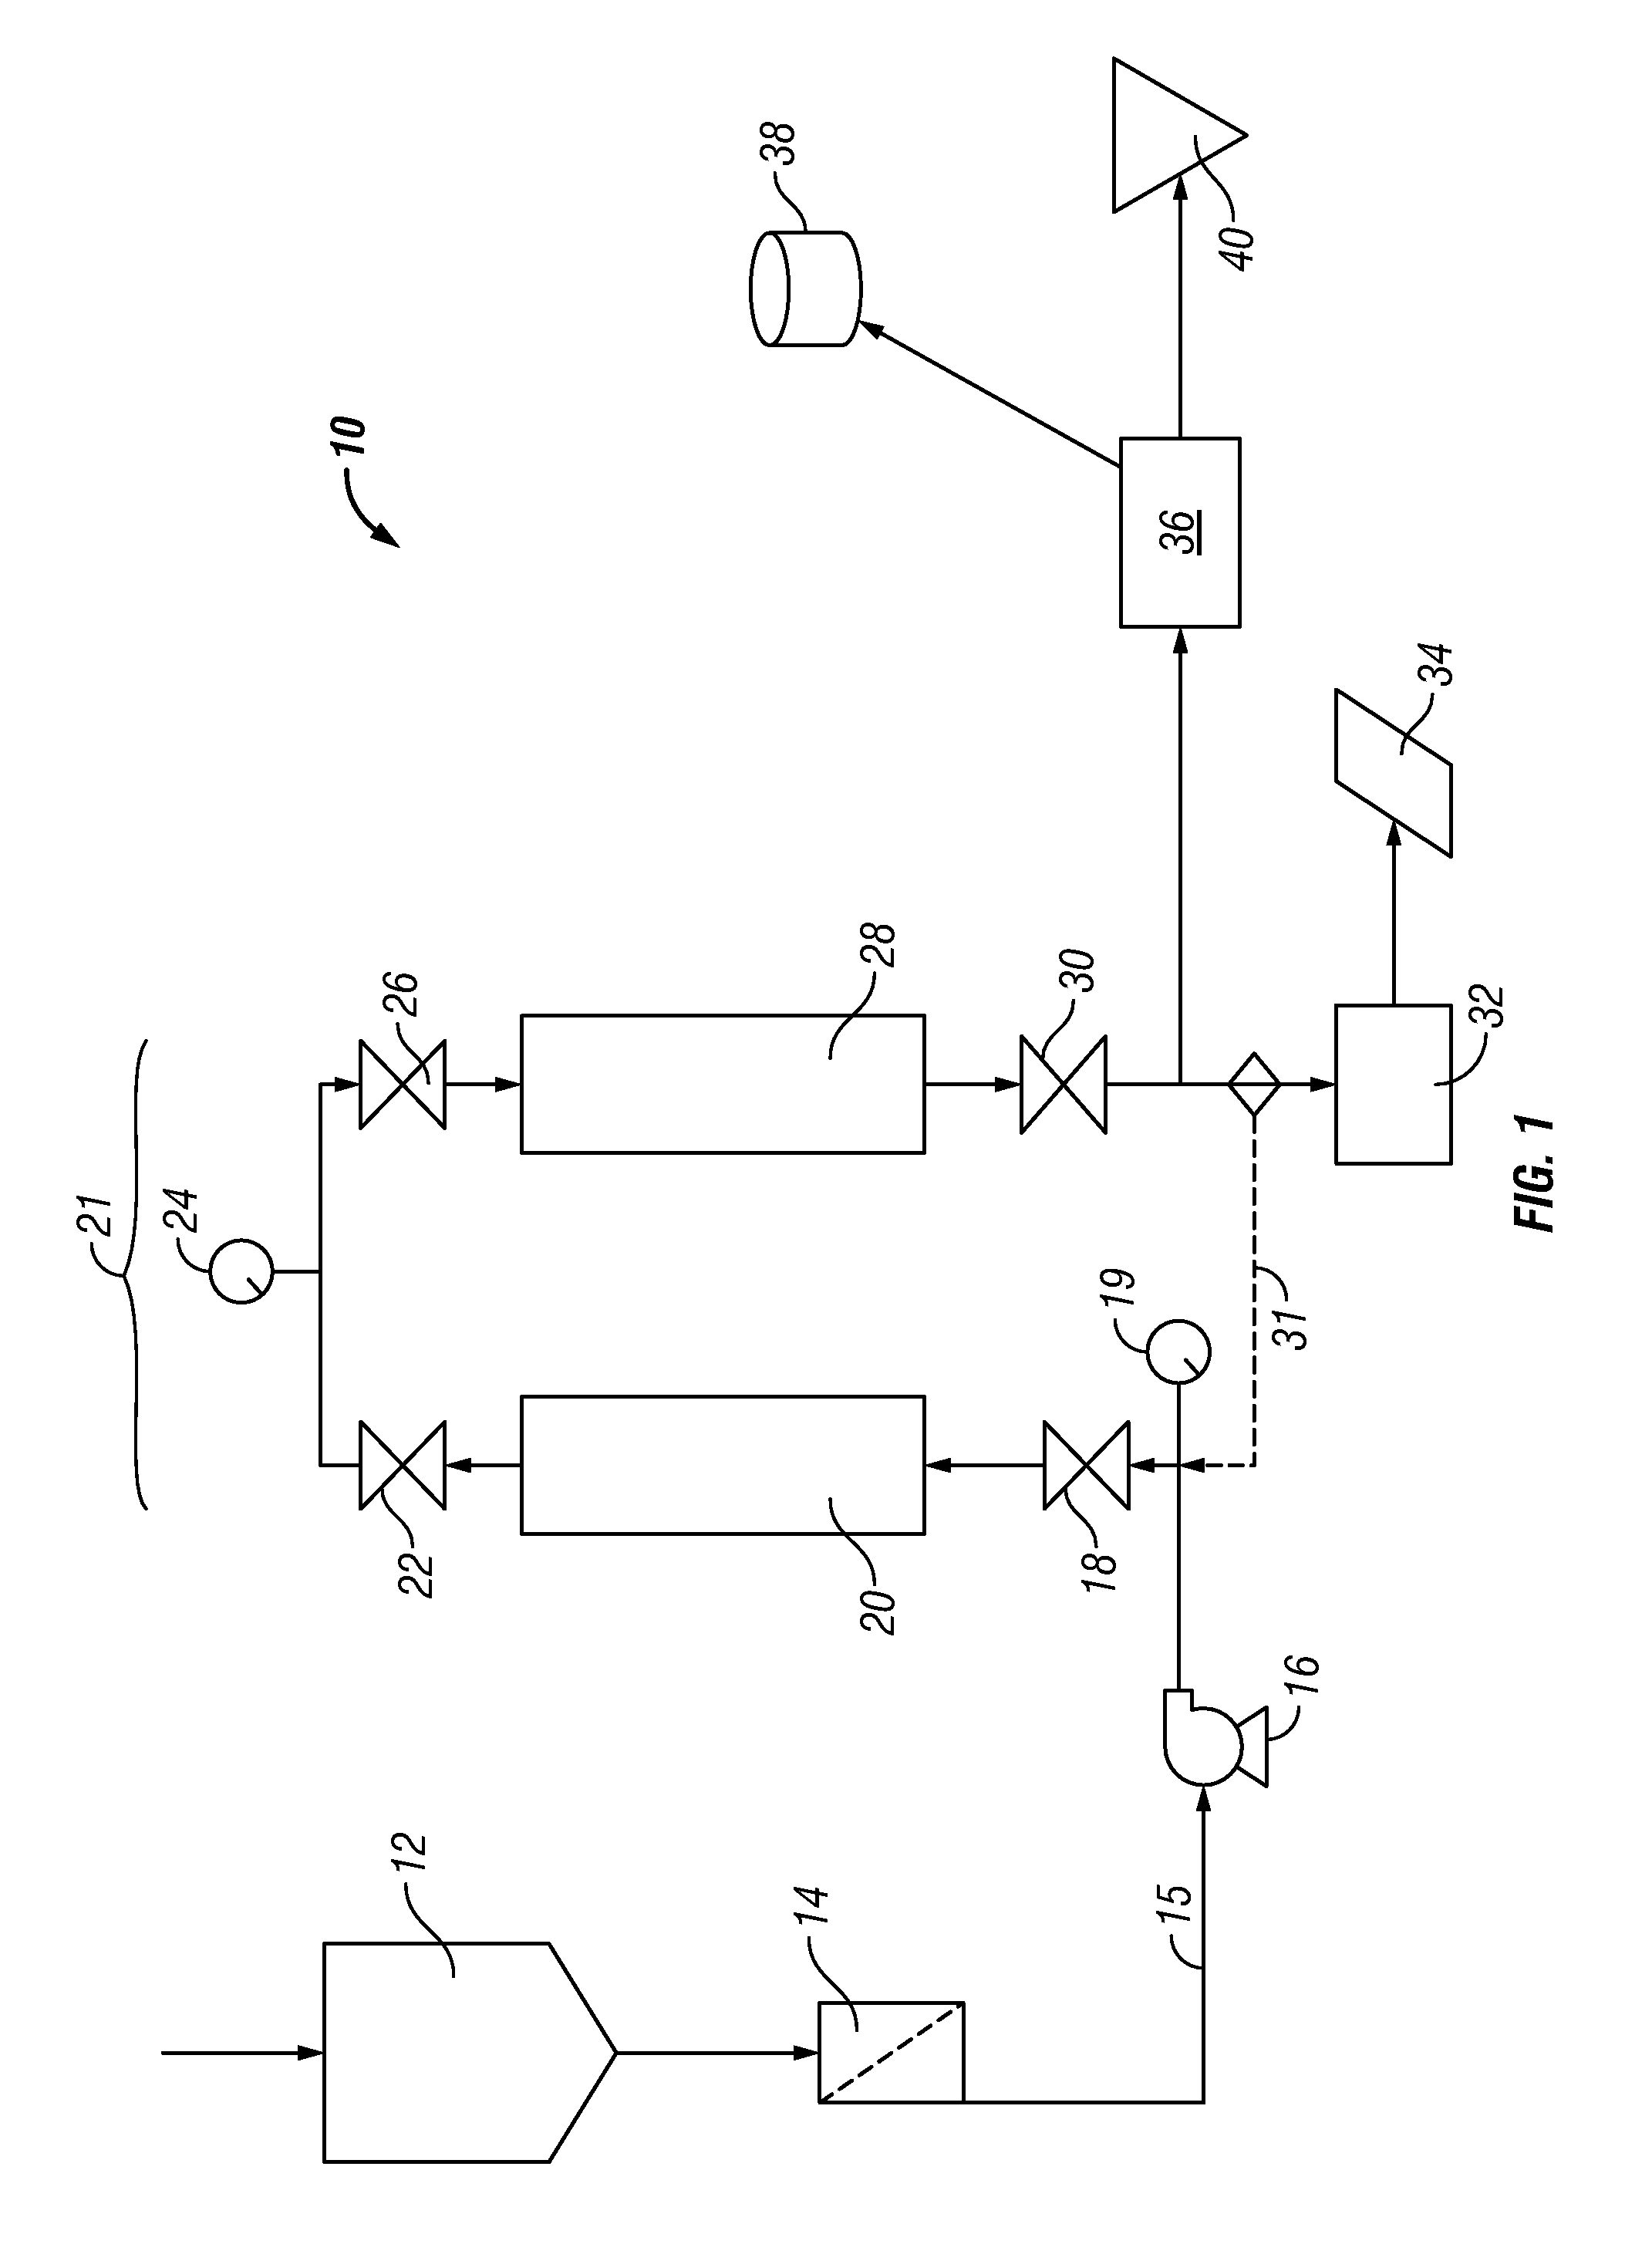 Process for Producing High-Purity Sucrose